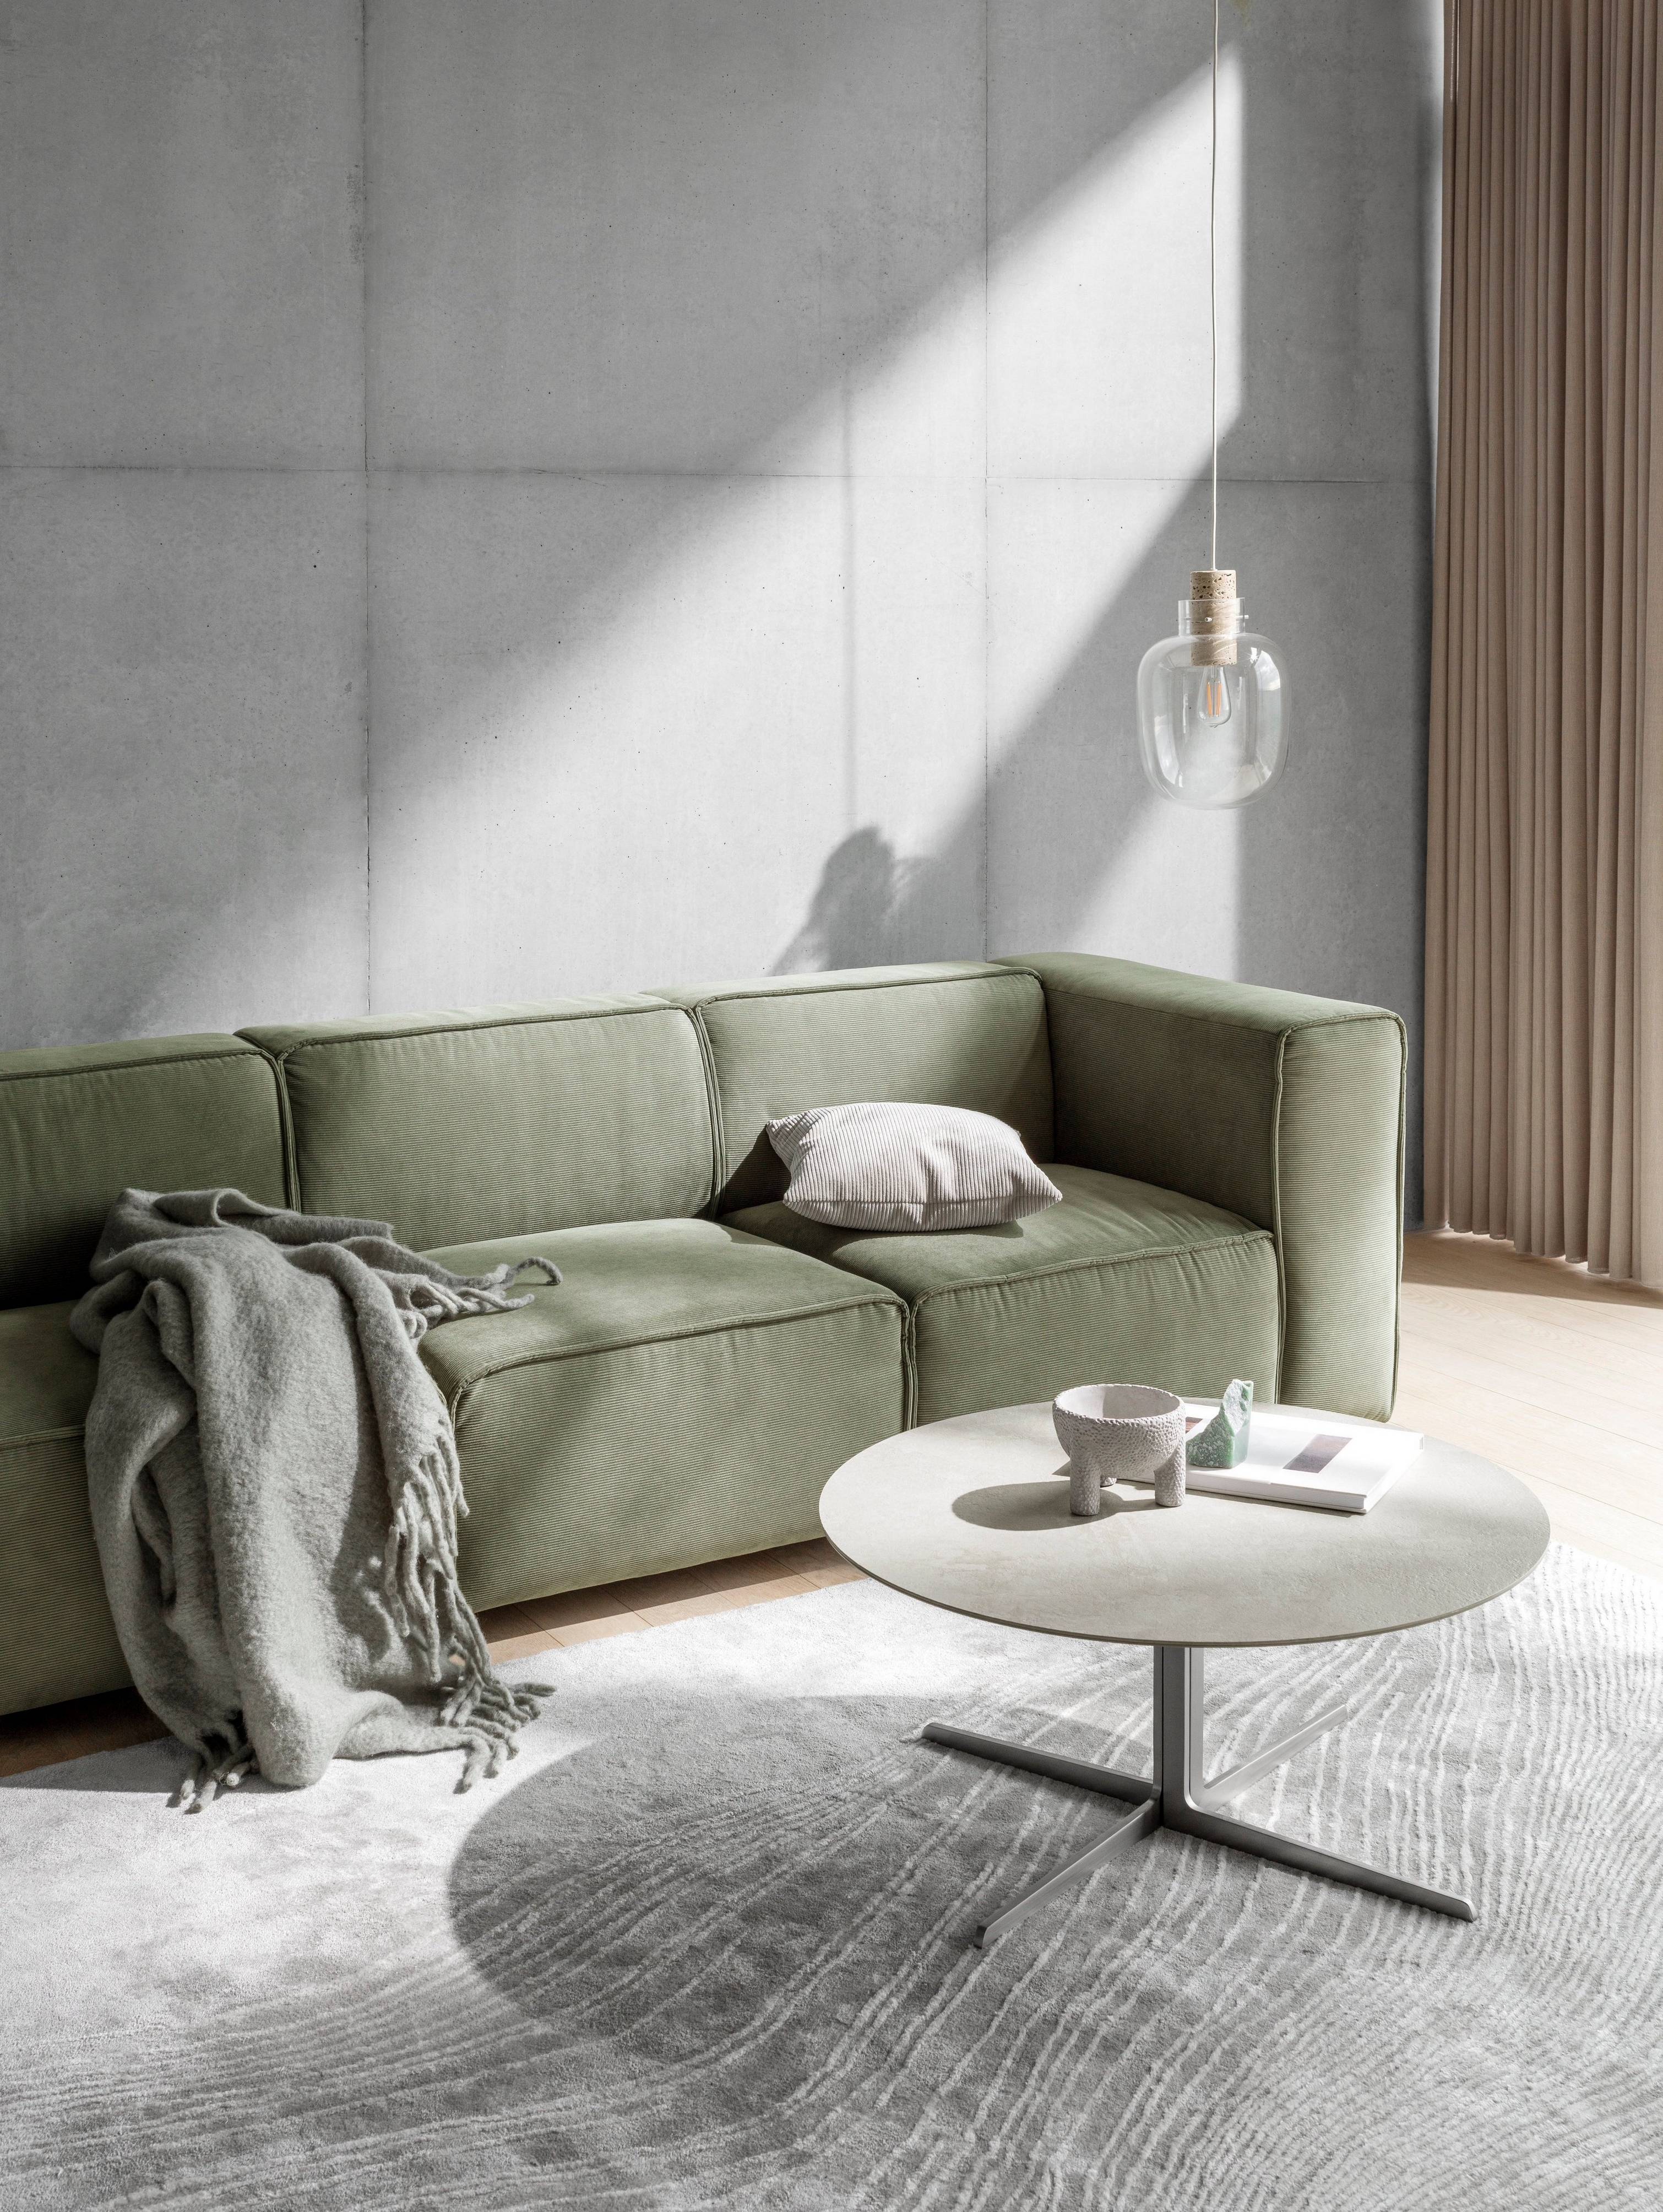 The Carmo sofa in a nicely sunlit room with a pillow and a rug on the seats.